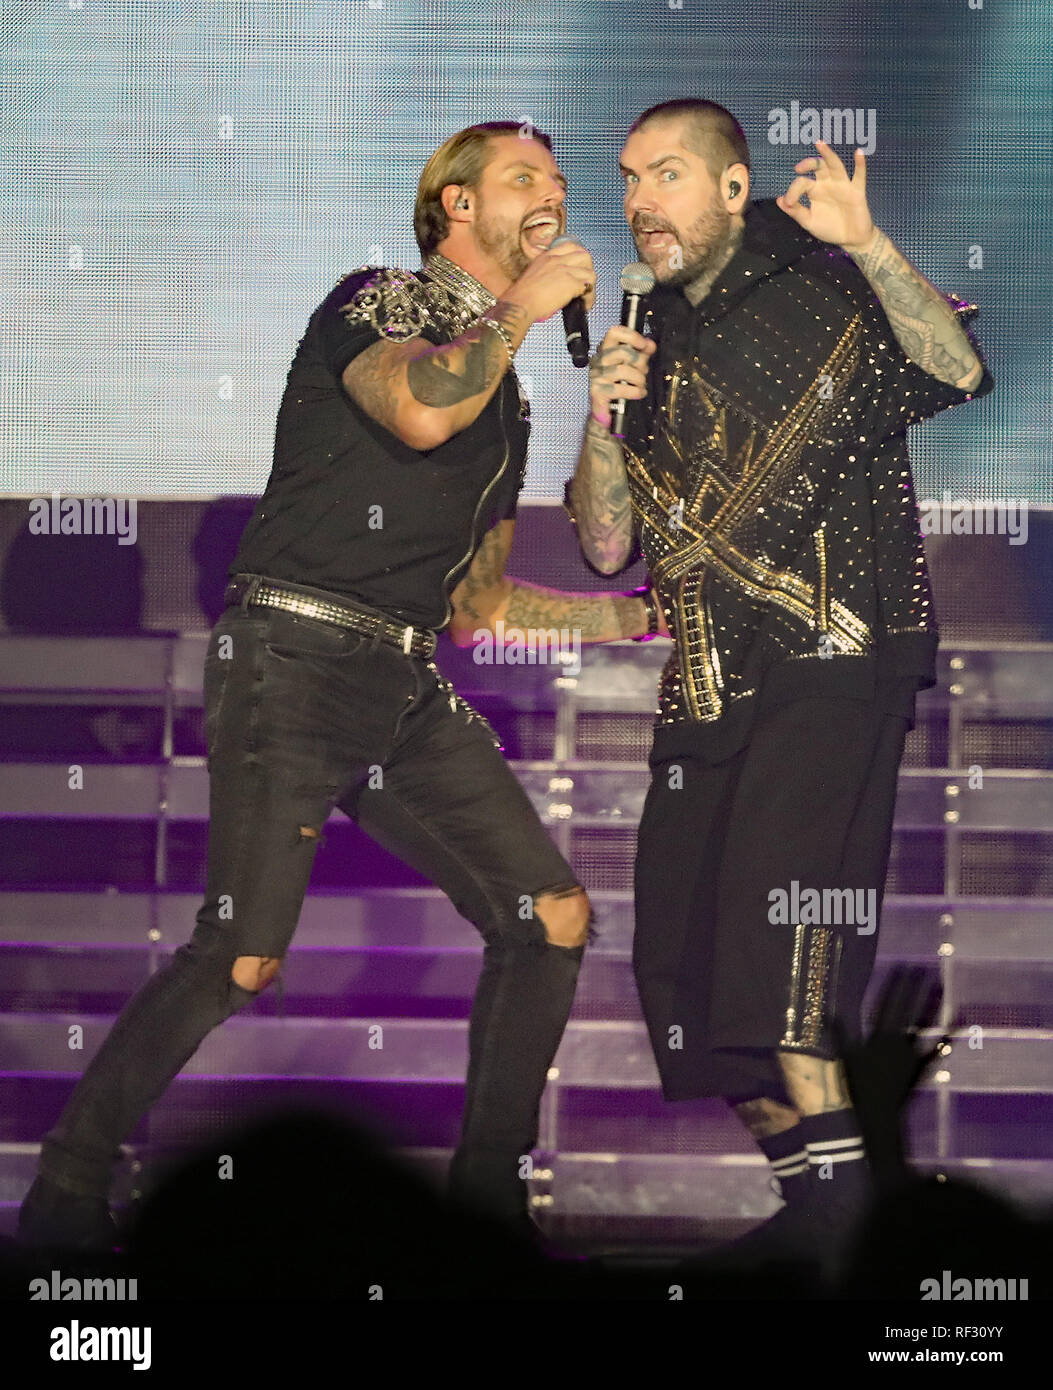 billig Skal Examen album EDITORIAL USE ONLY (left to right) Keith Duffy and Shane Lynch of Boyzone  on stage at the SSE Arena, Belfast, as part of the band's Thank You &  Goodnight farewell tour Stock